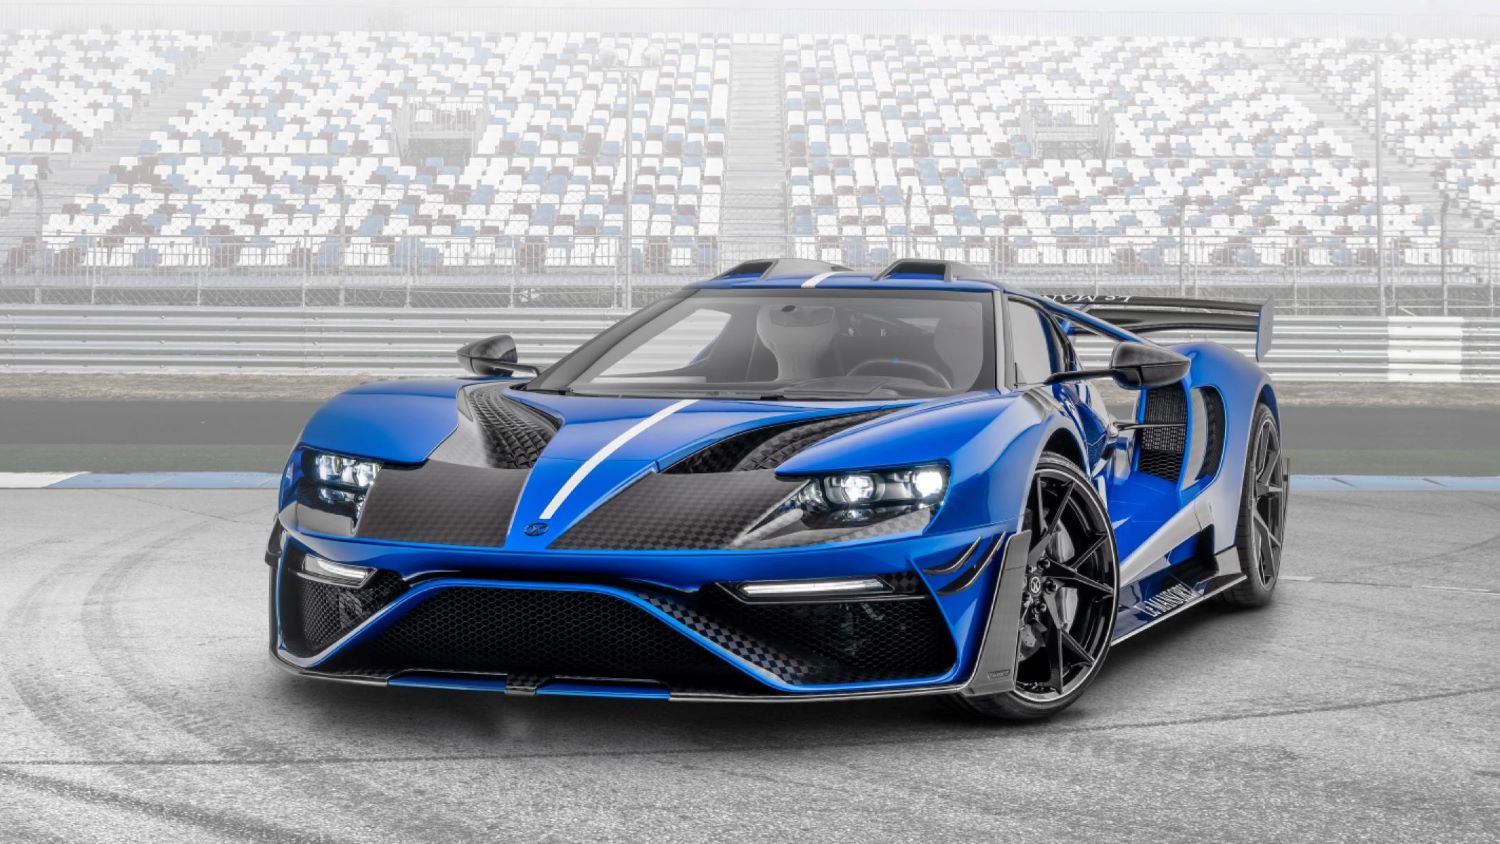 Mansory Ford Gt Gives Blue Oval Supercar More Power Distinctive Style